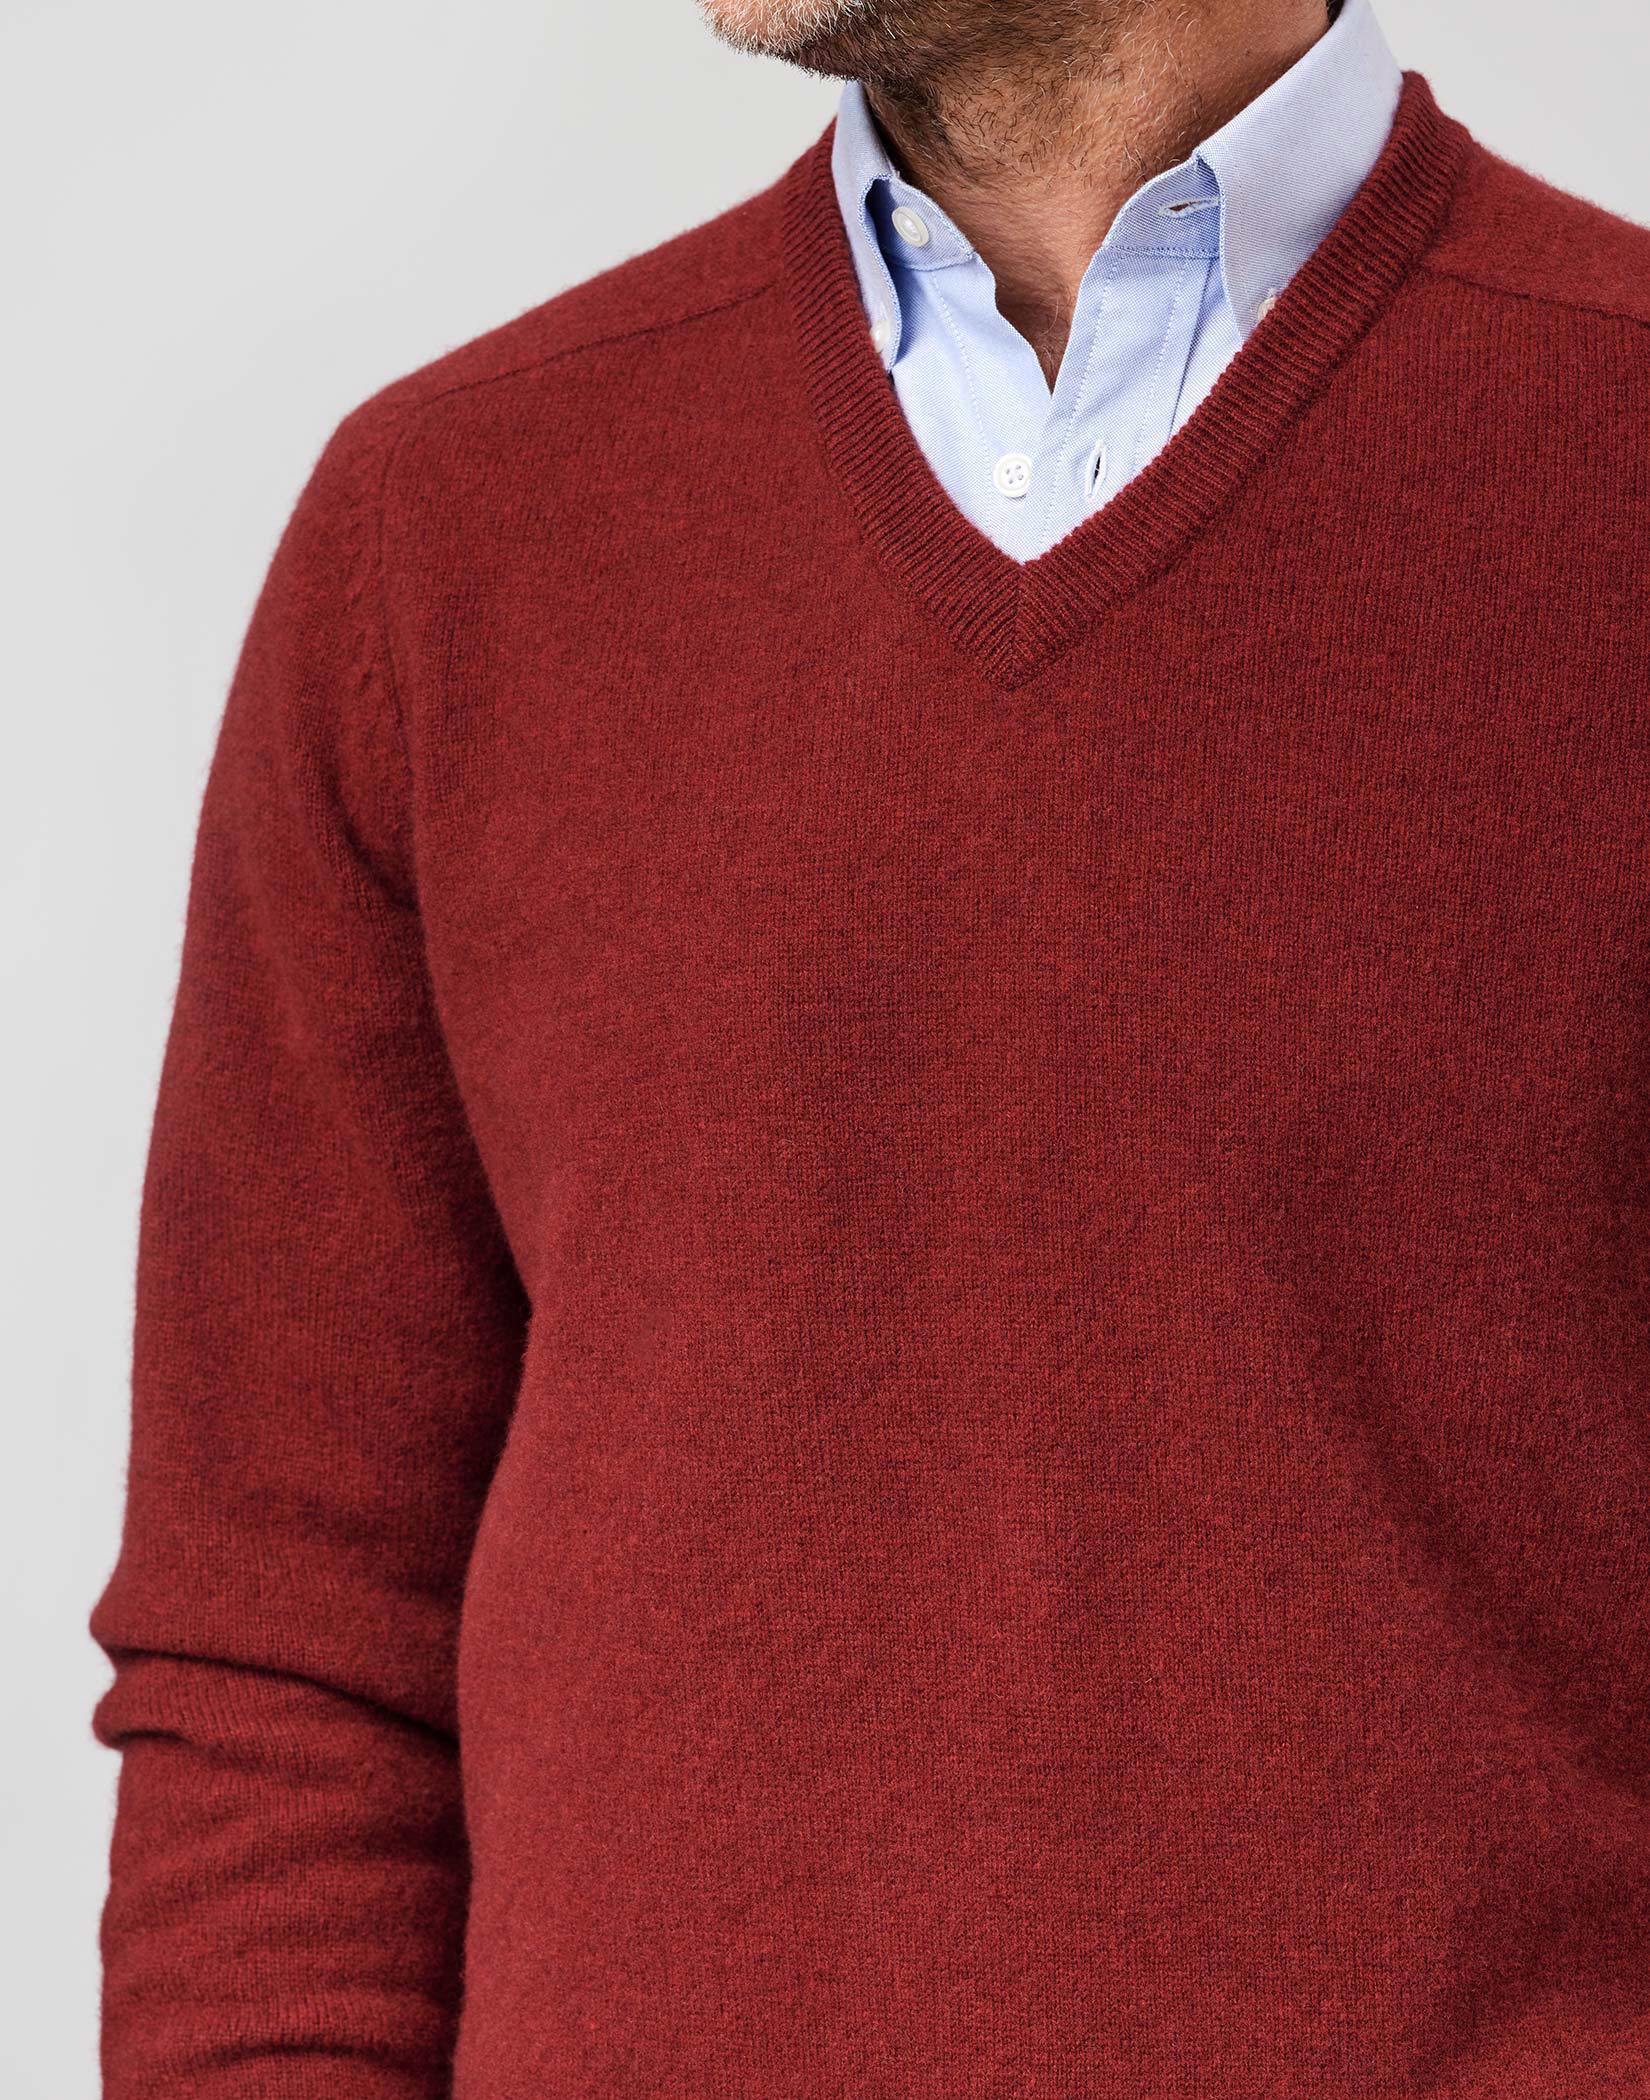 Lambswool V Neck - Red